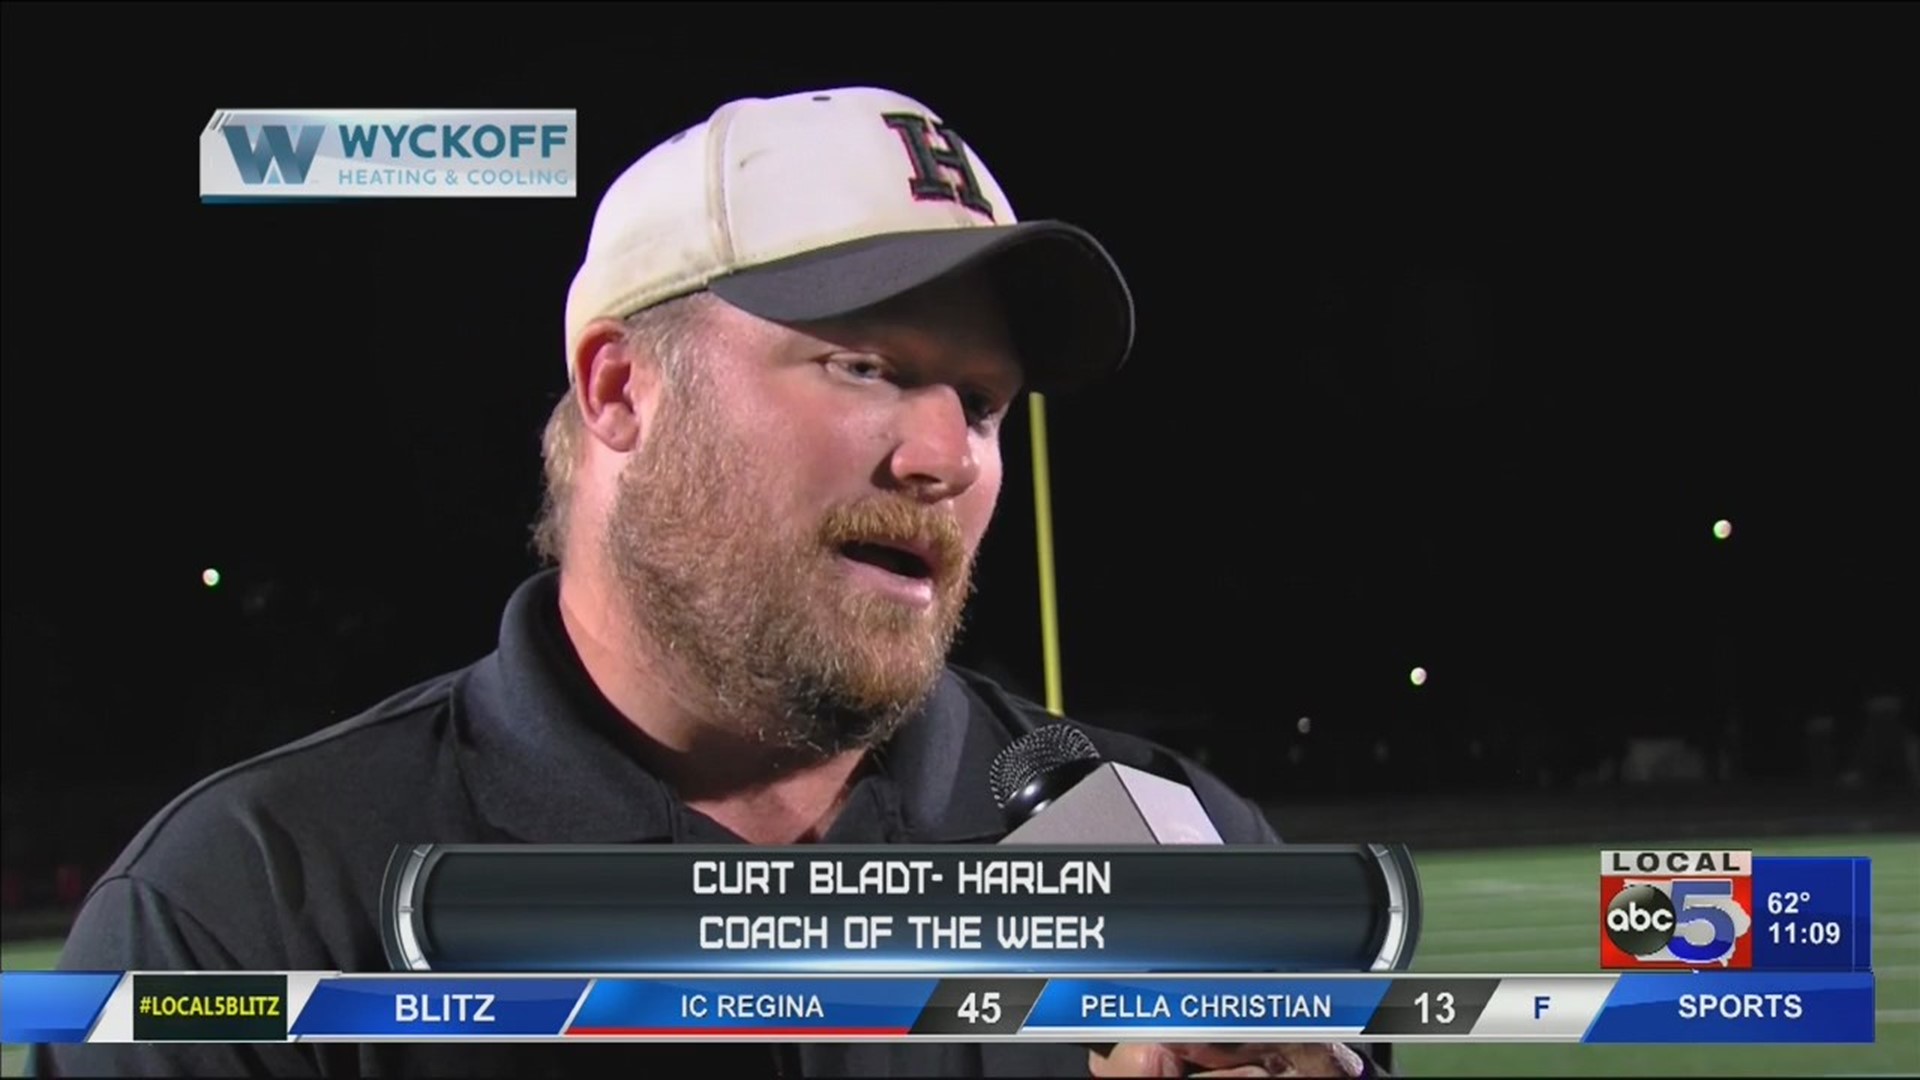 Harlan highlights and Wyckoff Heating & Cooling Coach of the Week